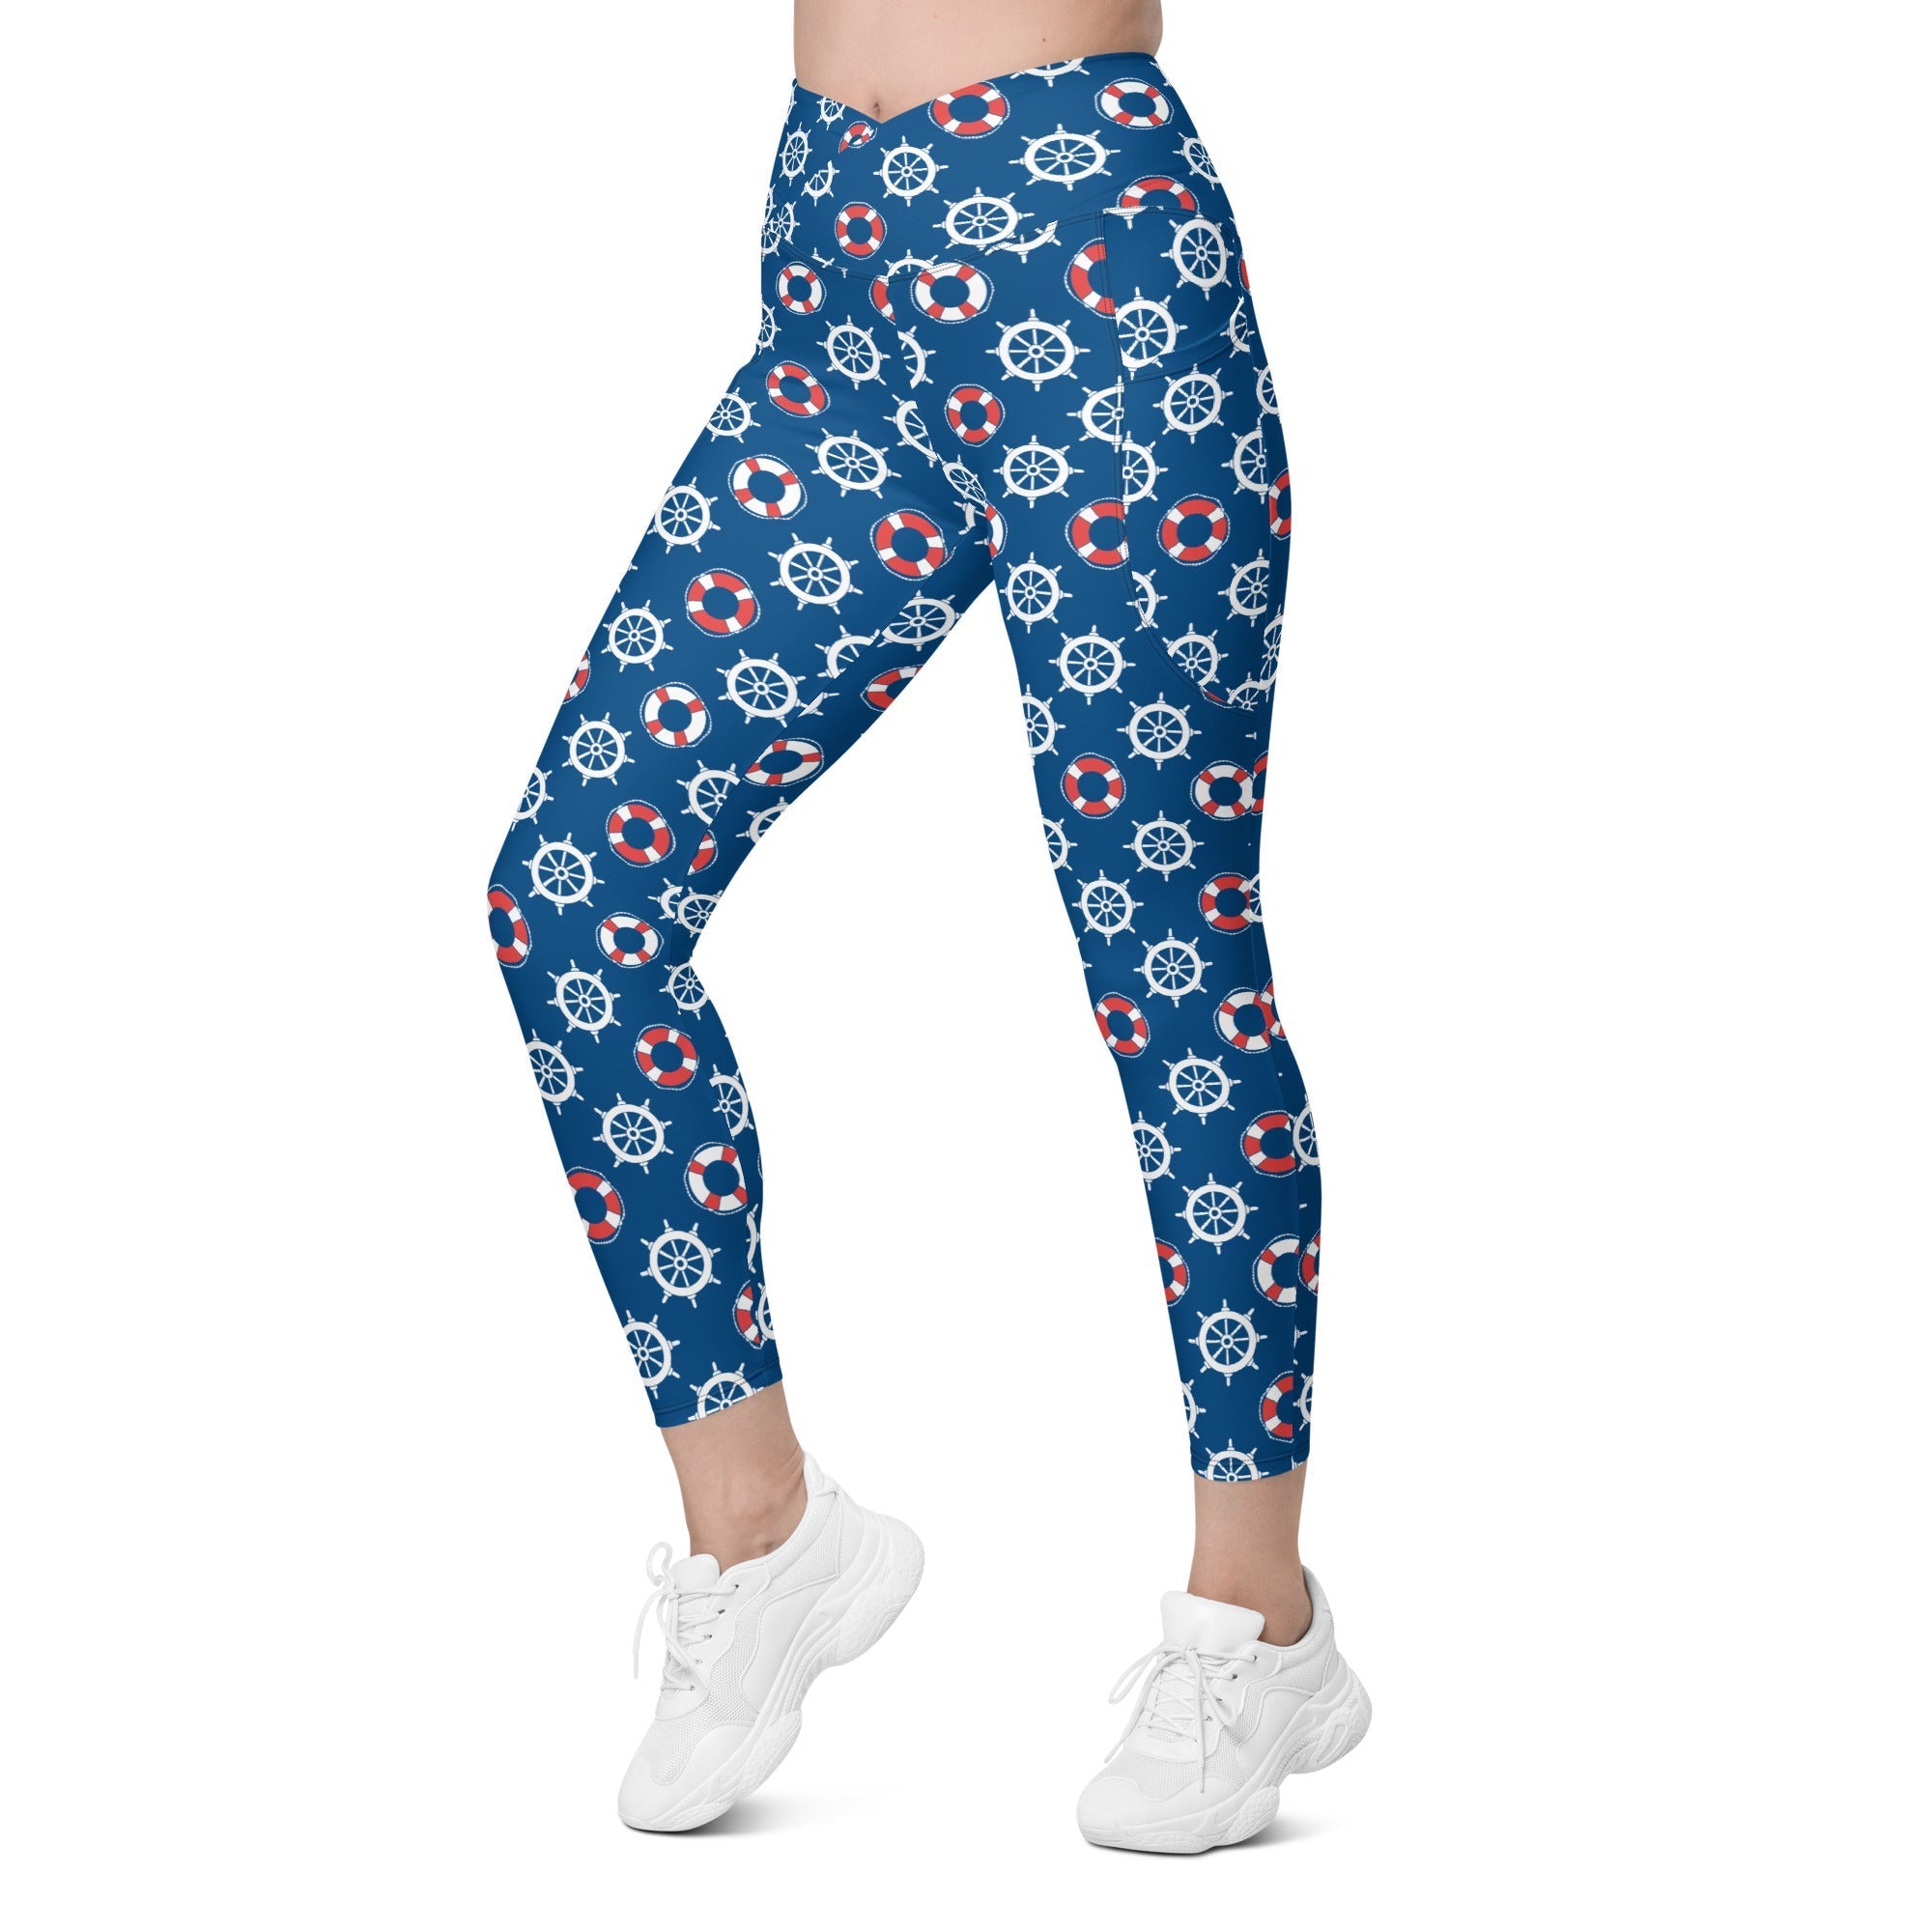 Nautical Crossover Leggings With Pockets